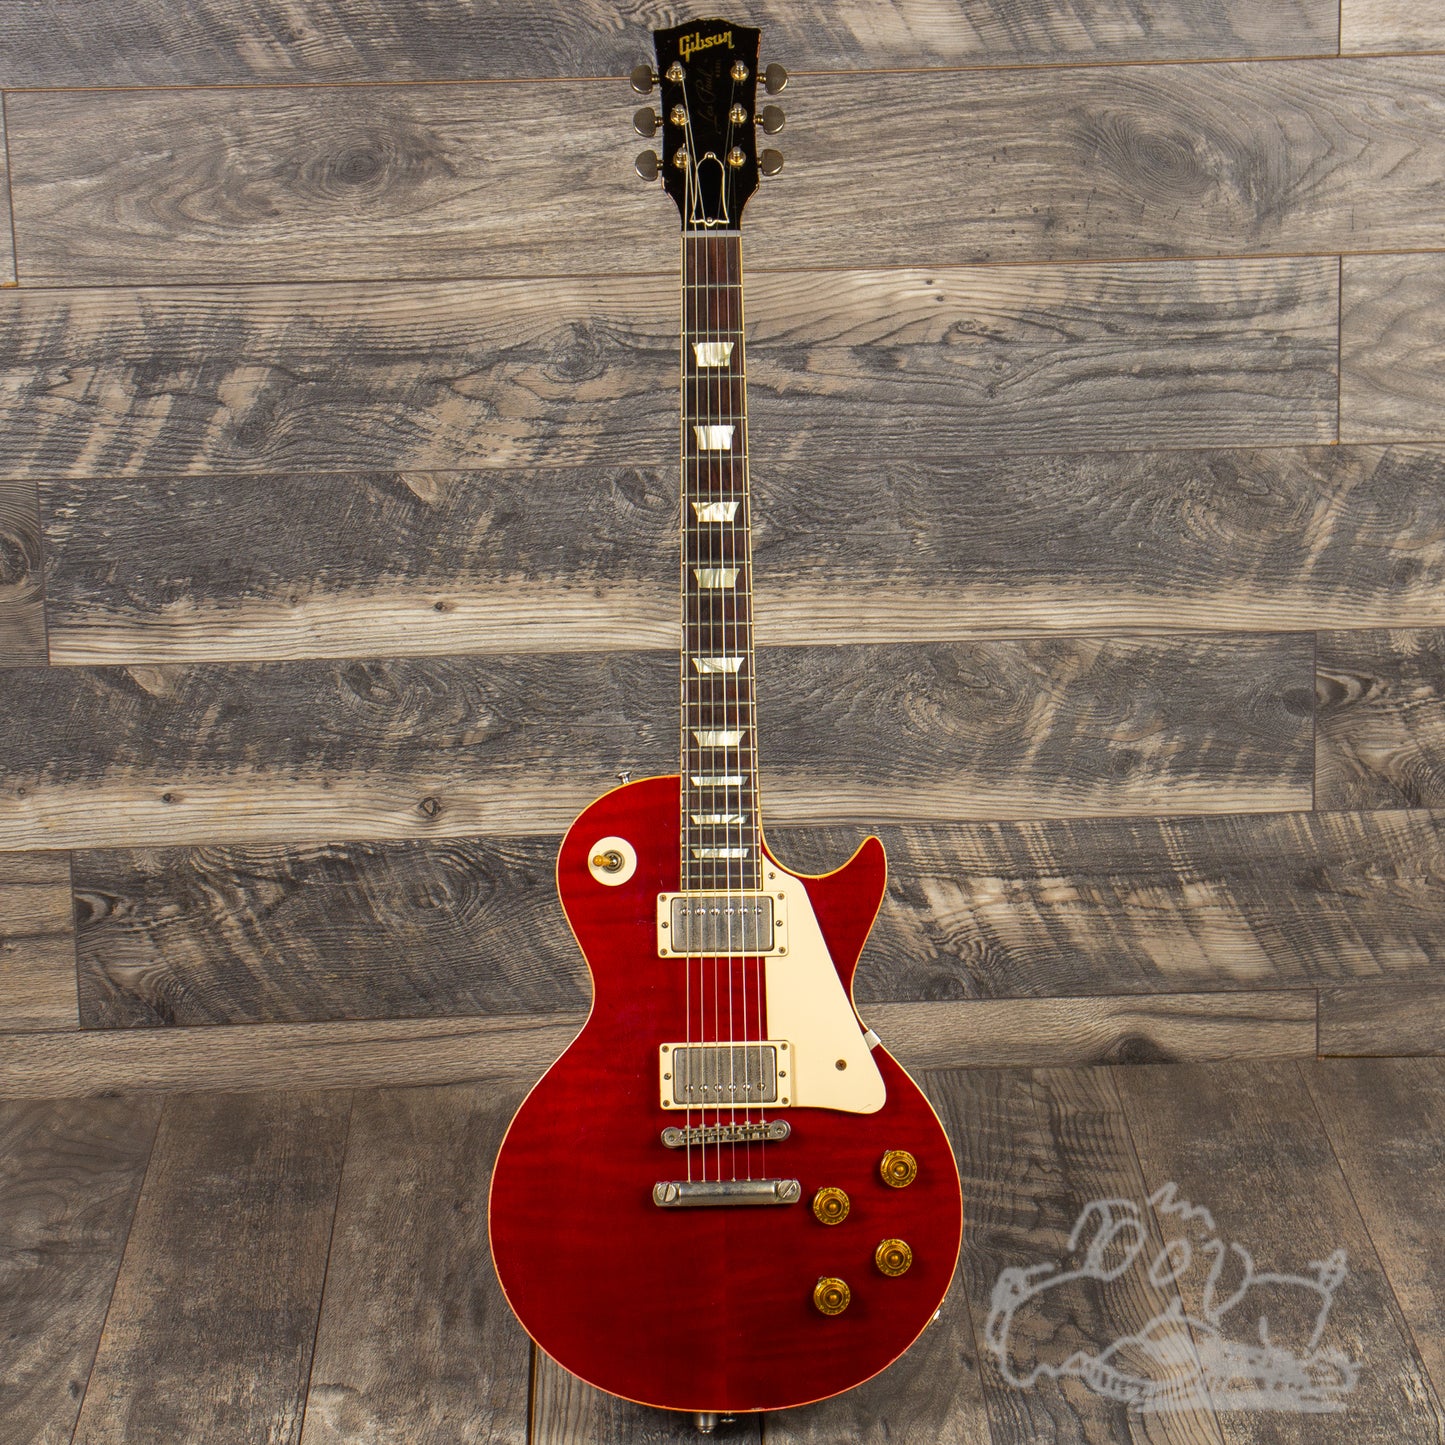 2015 Gibson Custom Shop Collectors Choice #29 with Historic Makeovers upgrades